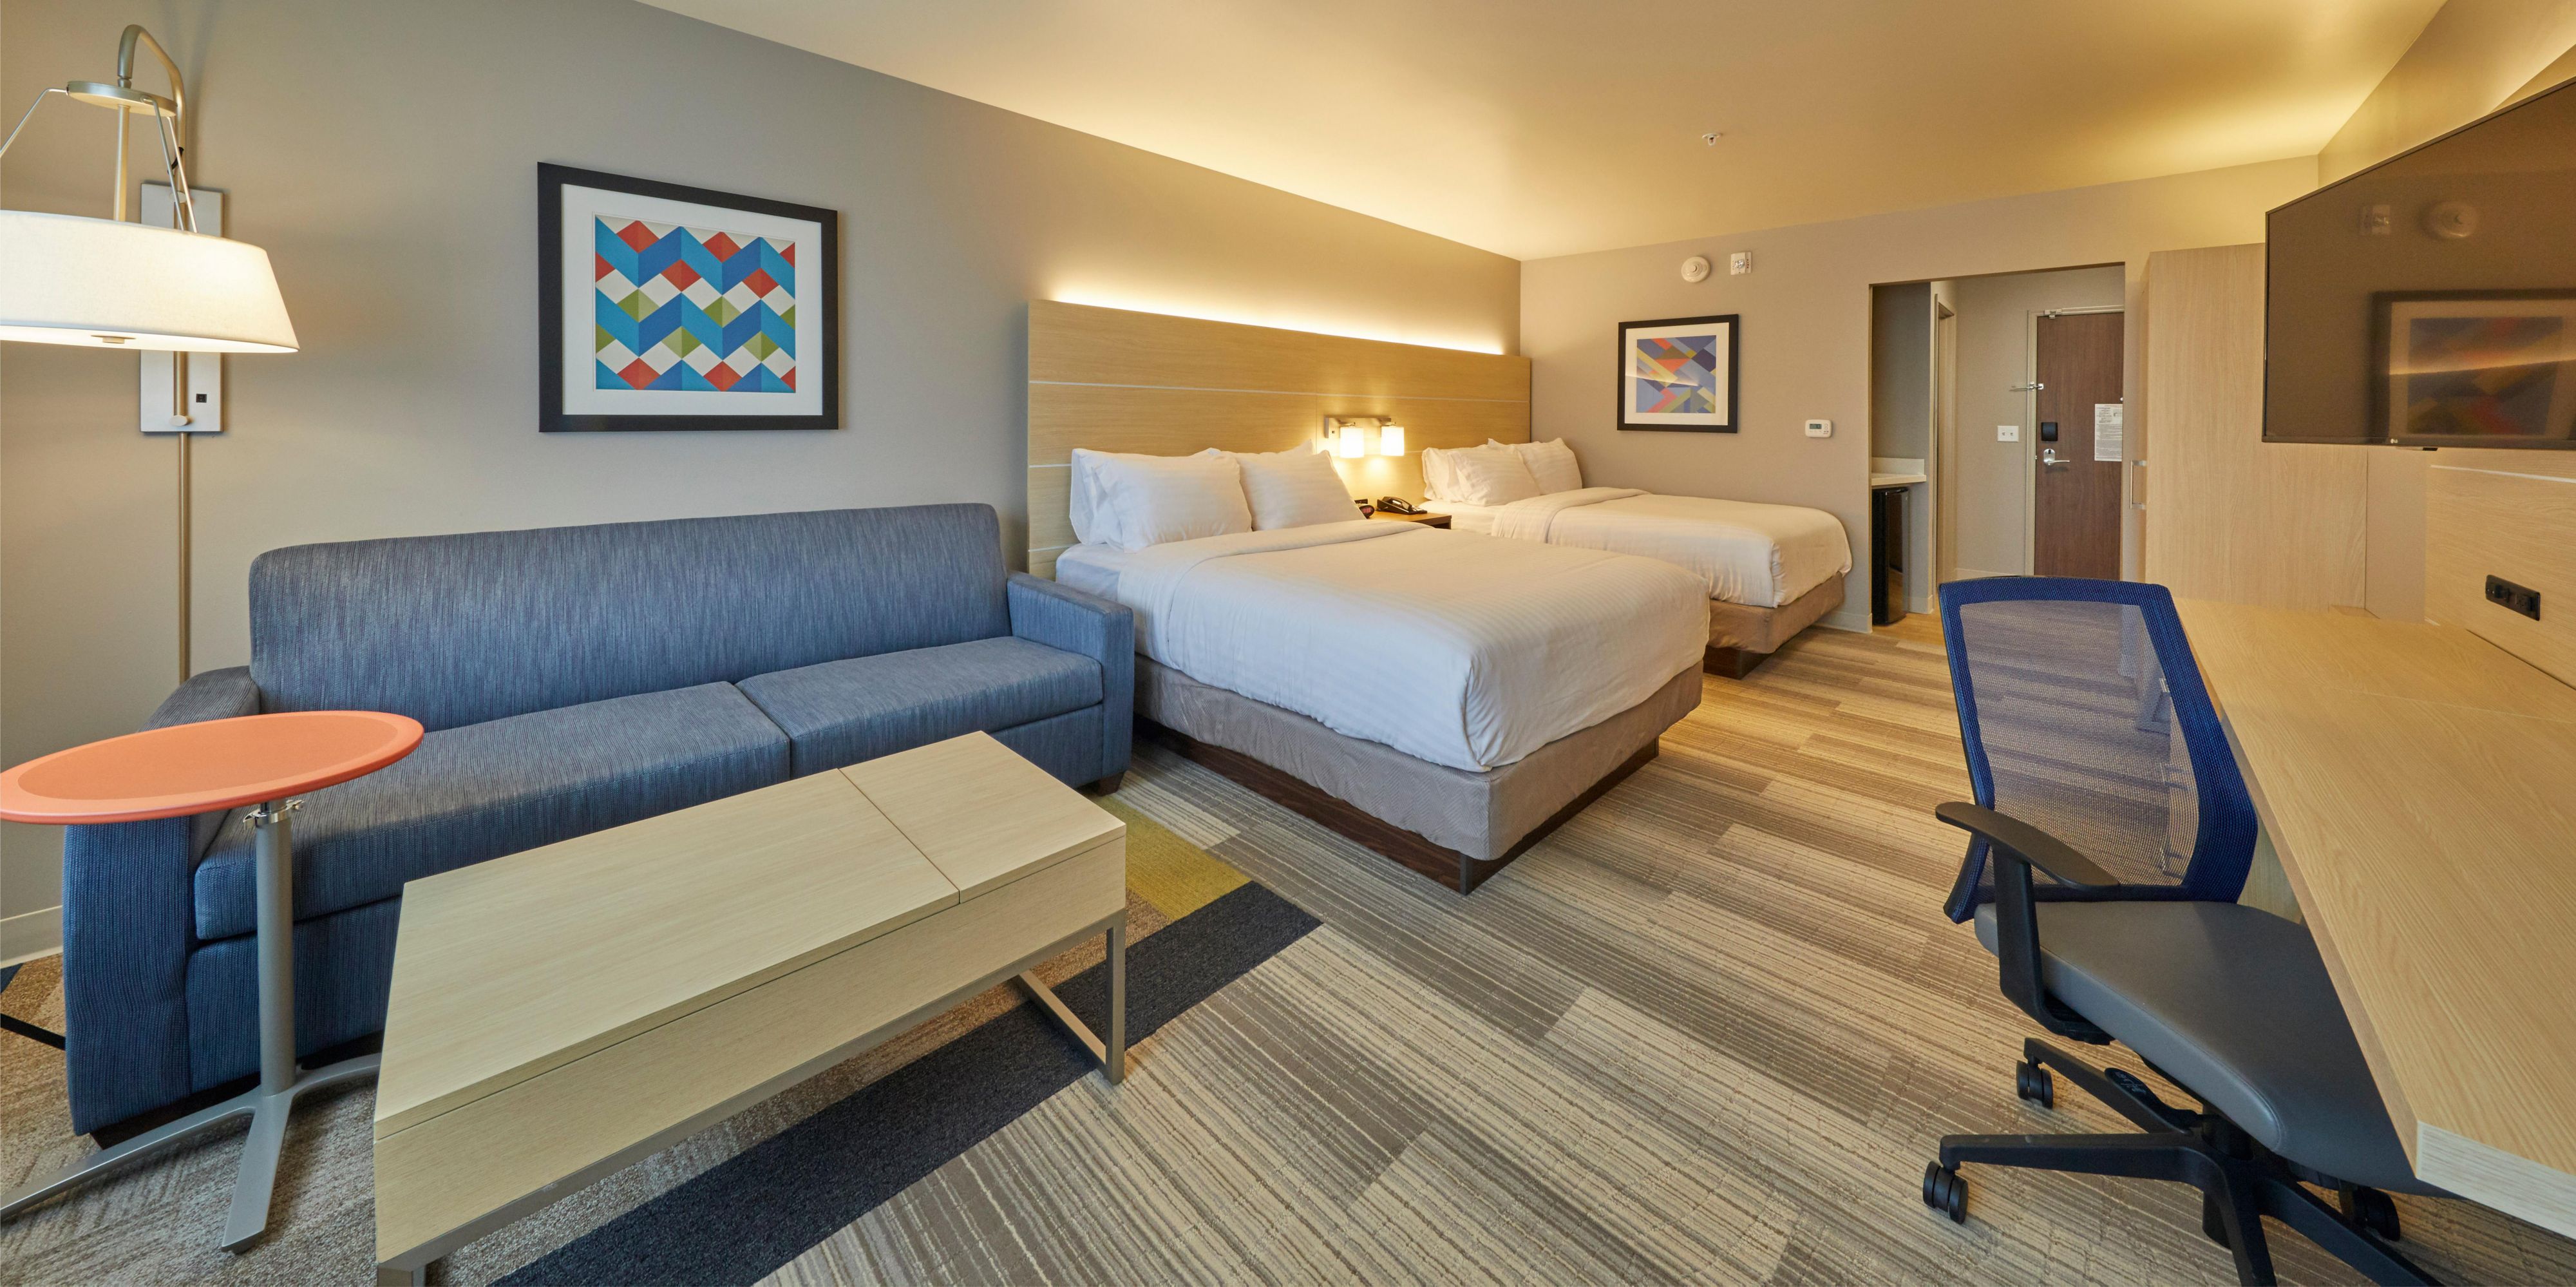 Our spacious suites are the perfect choice for traveling with families, or larger groups.